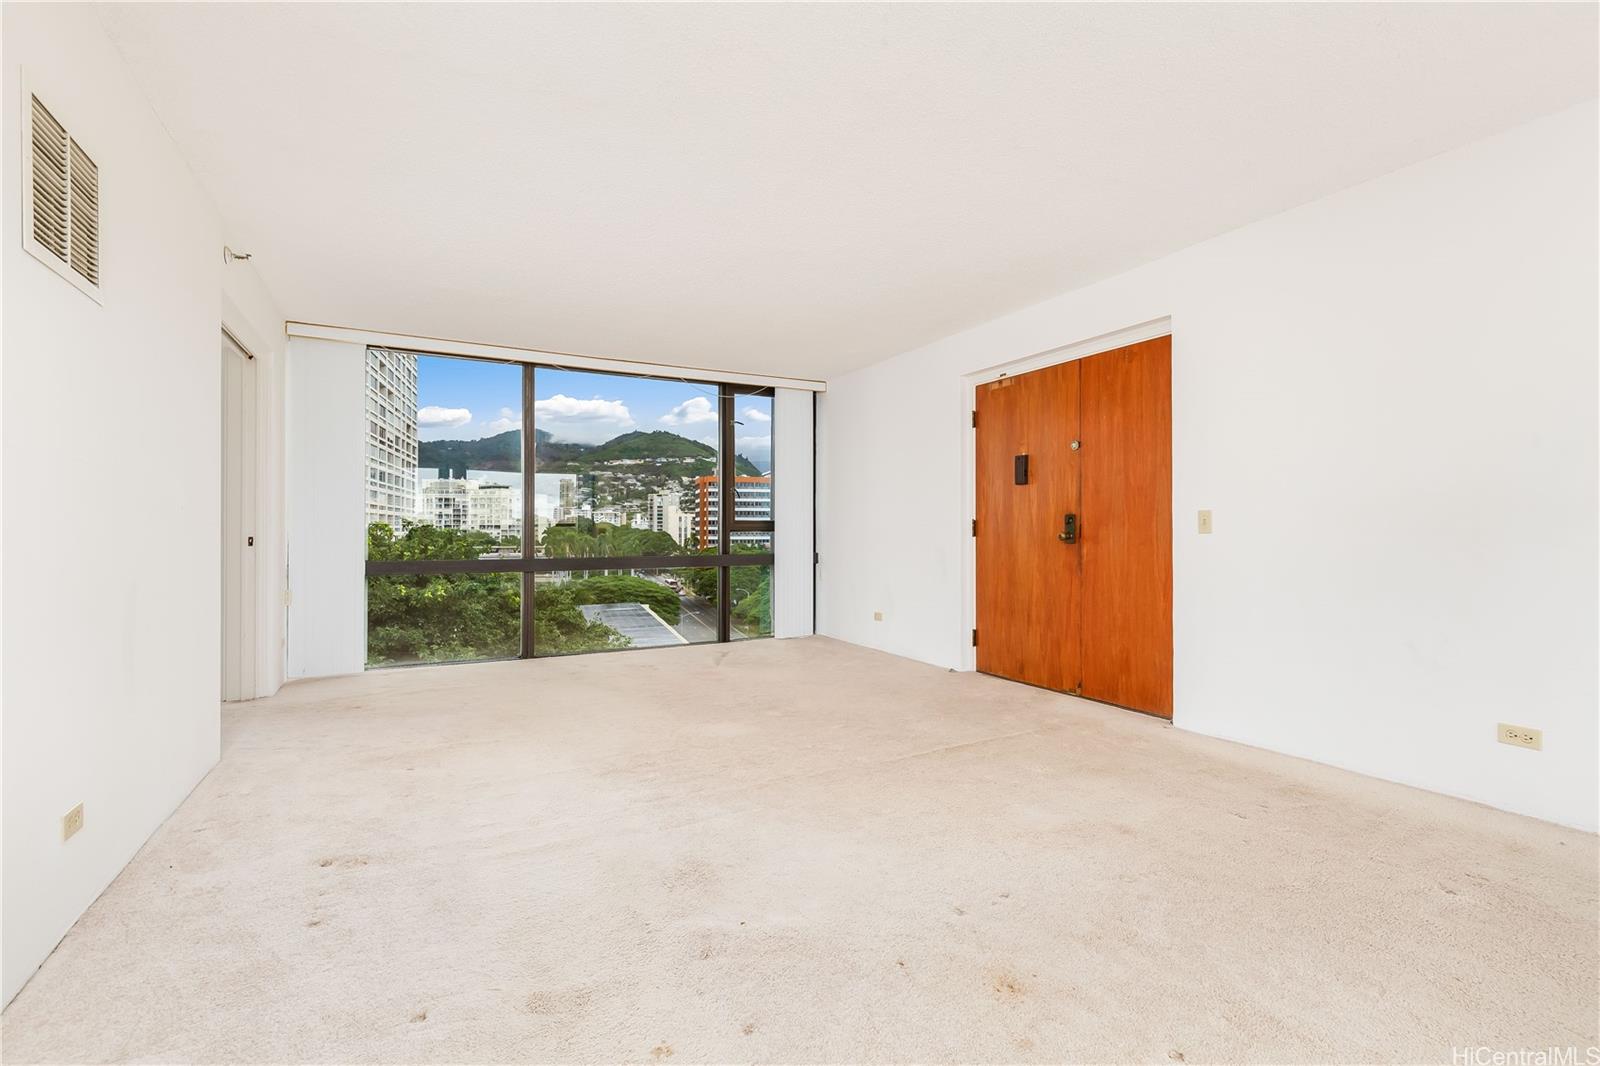 Enjoy a large living room with great mountain views.